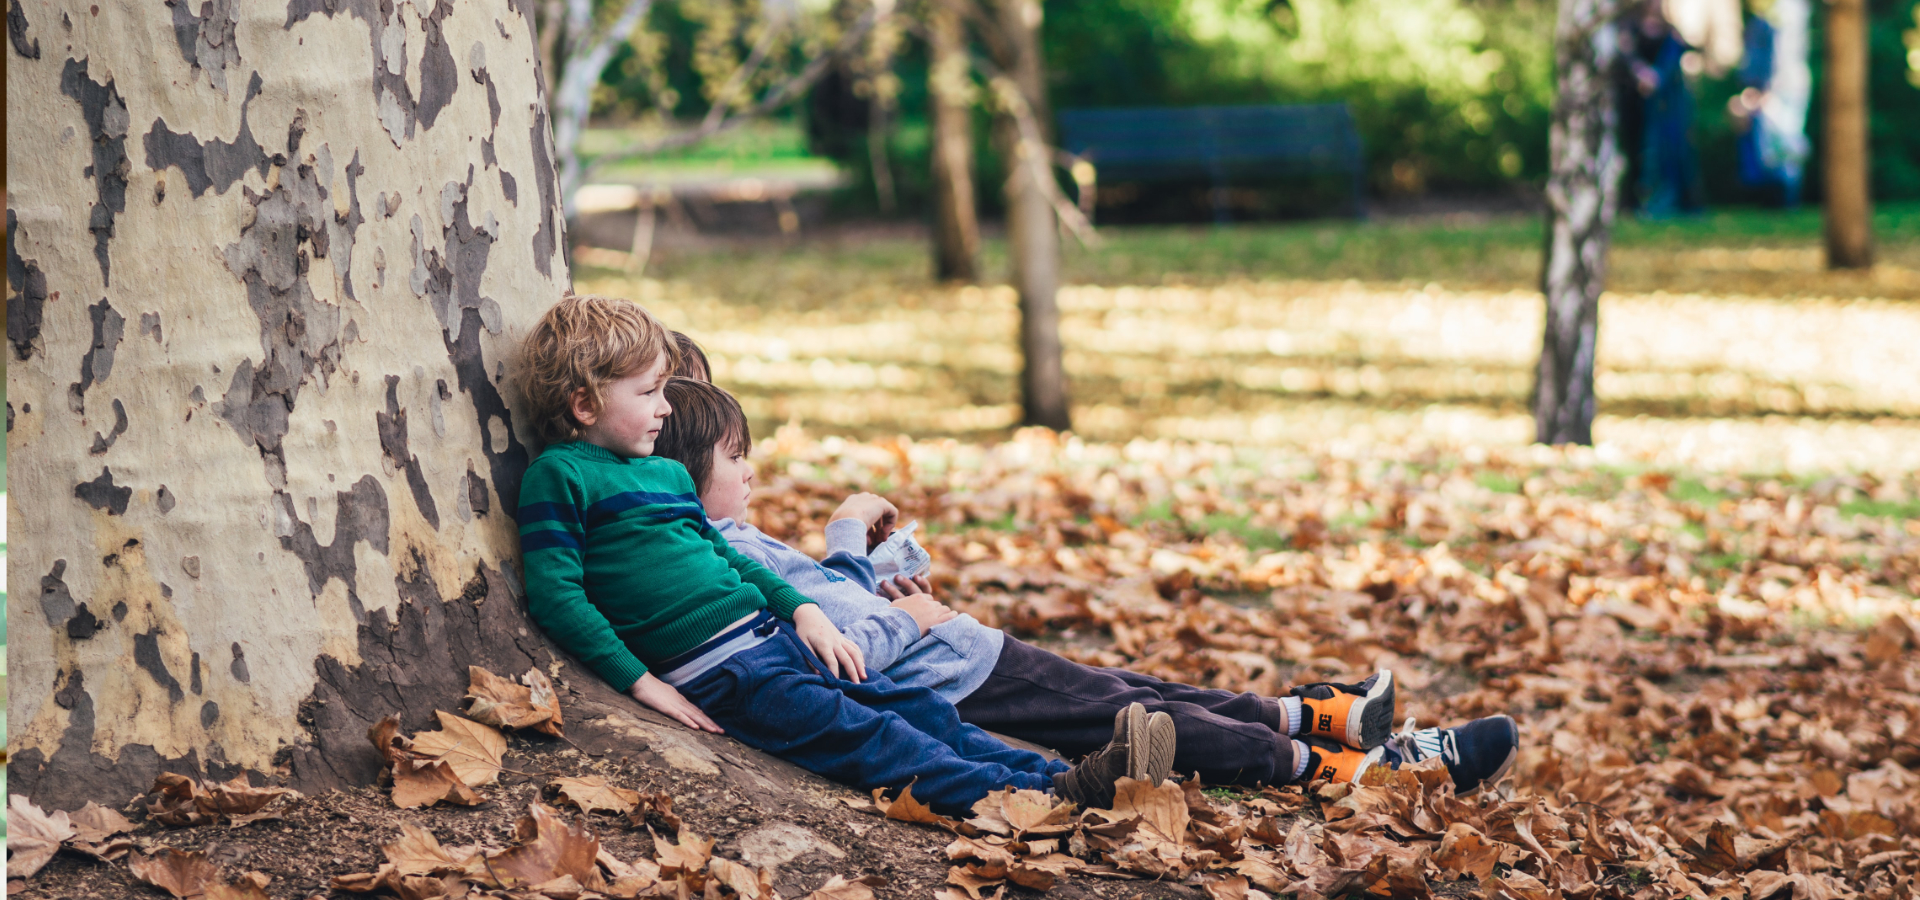 Exposure to green spaces protects children from allergic diseases